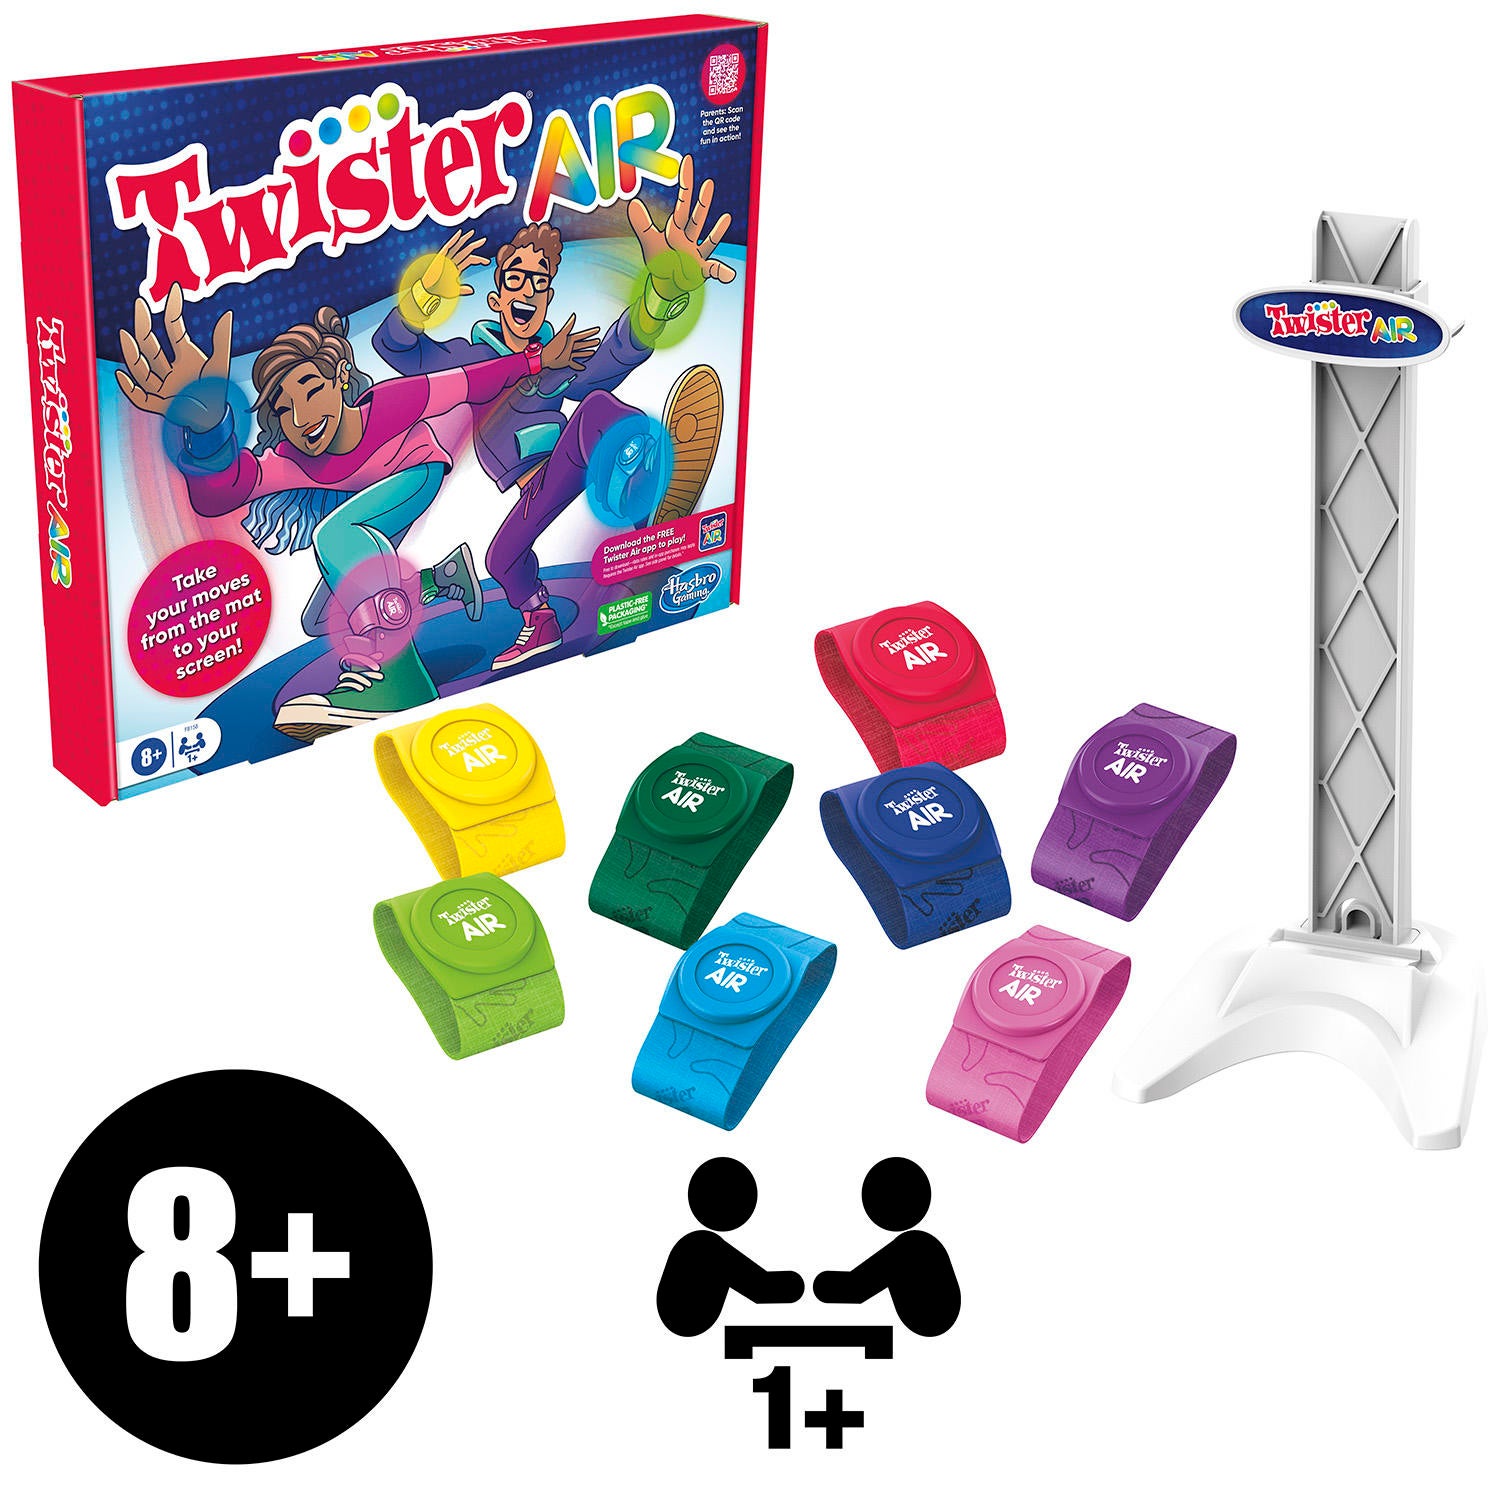 Hasbro Gaming The Classic Twister Game Kit